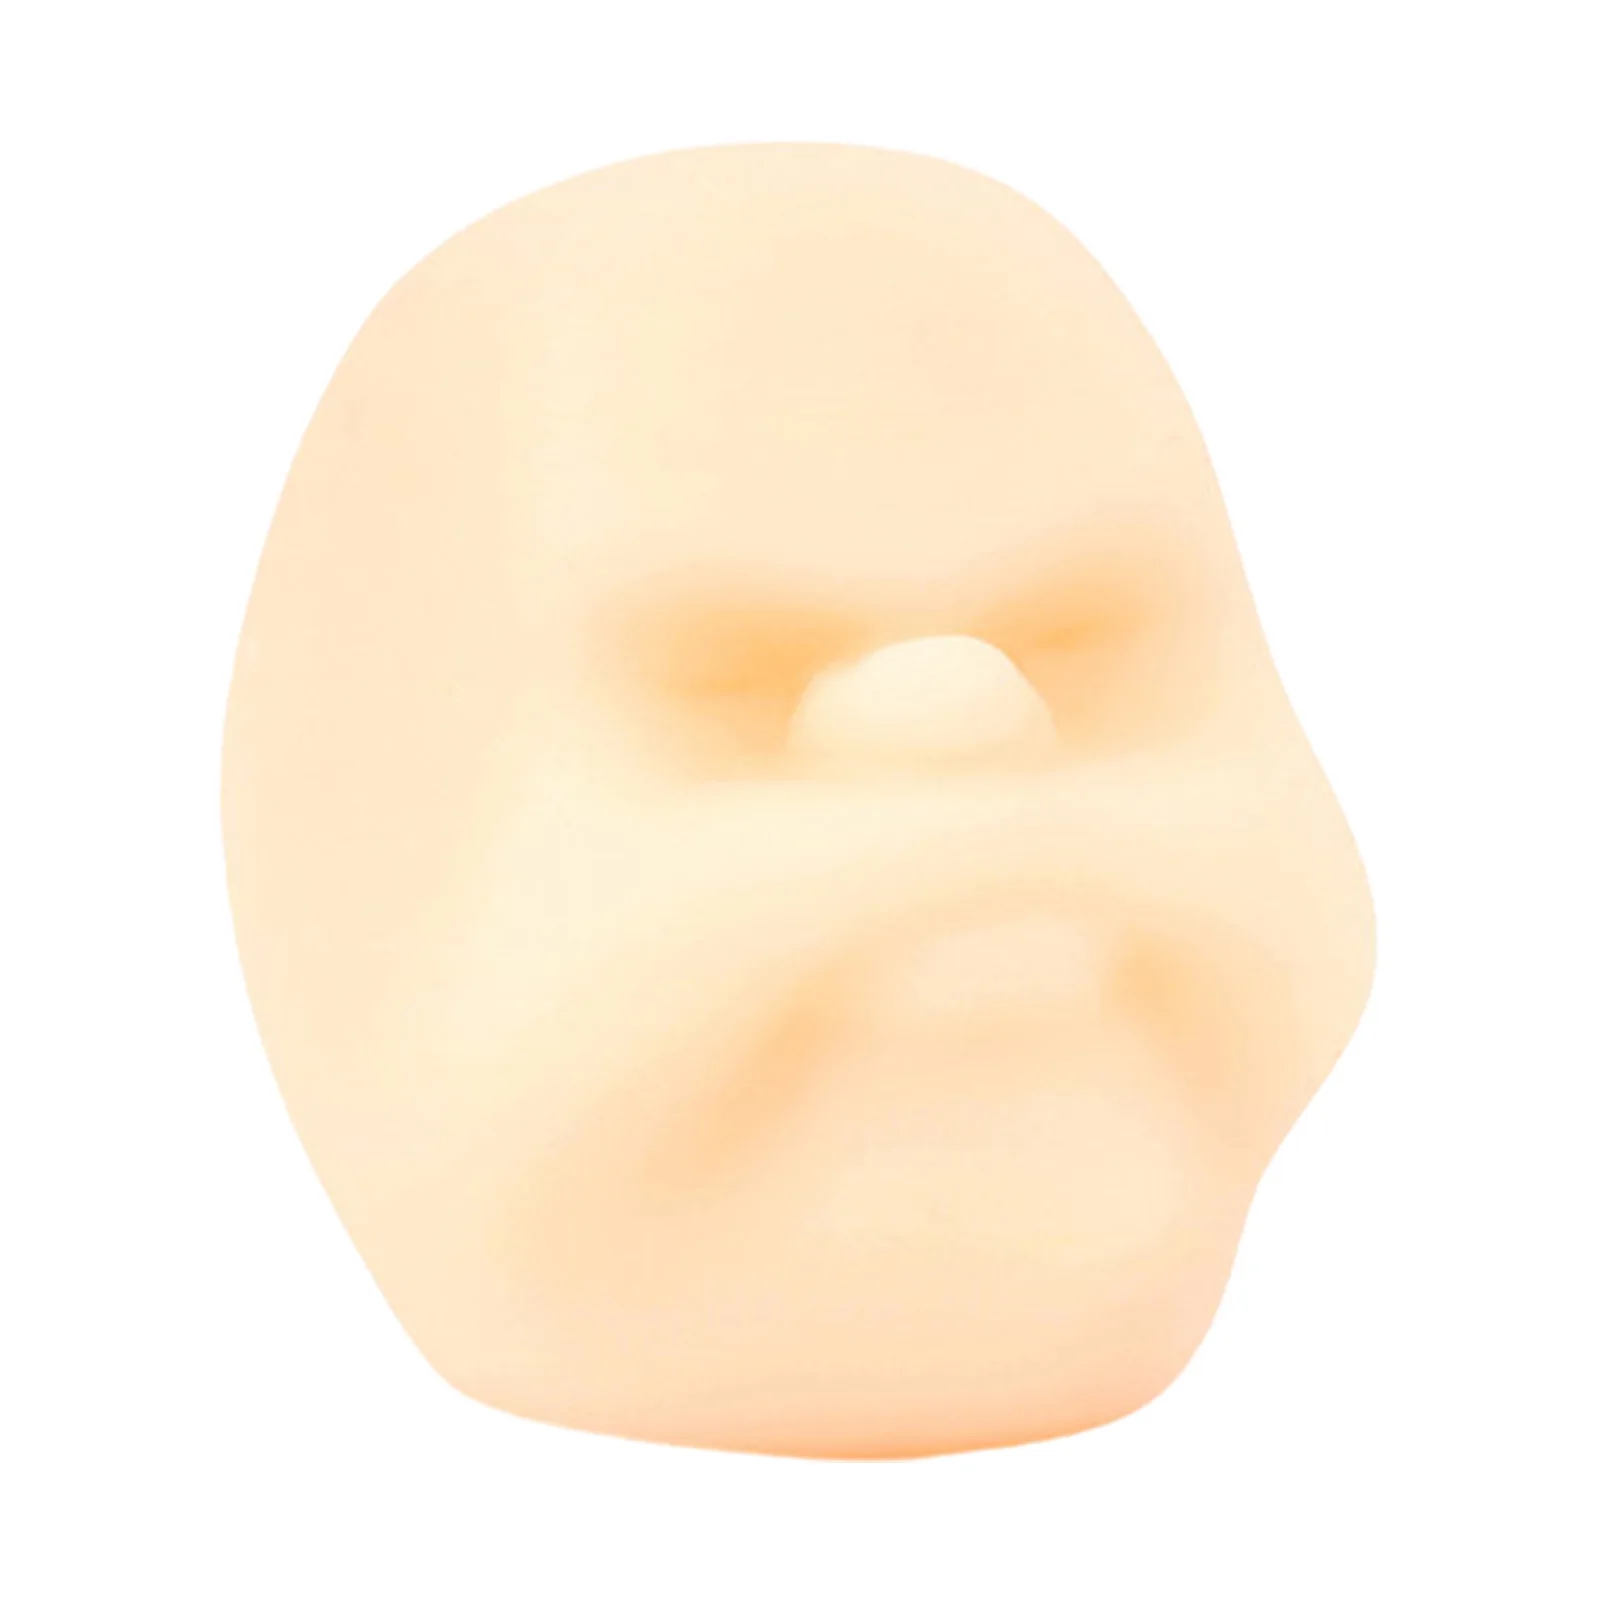 

1pcs Squishy Sensory Stress Human Face Toys For Adults Teens Kids Decompression Anxiety Relief Toy Funny Gift For Birthday